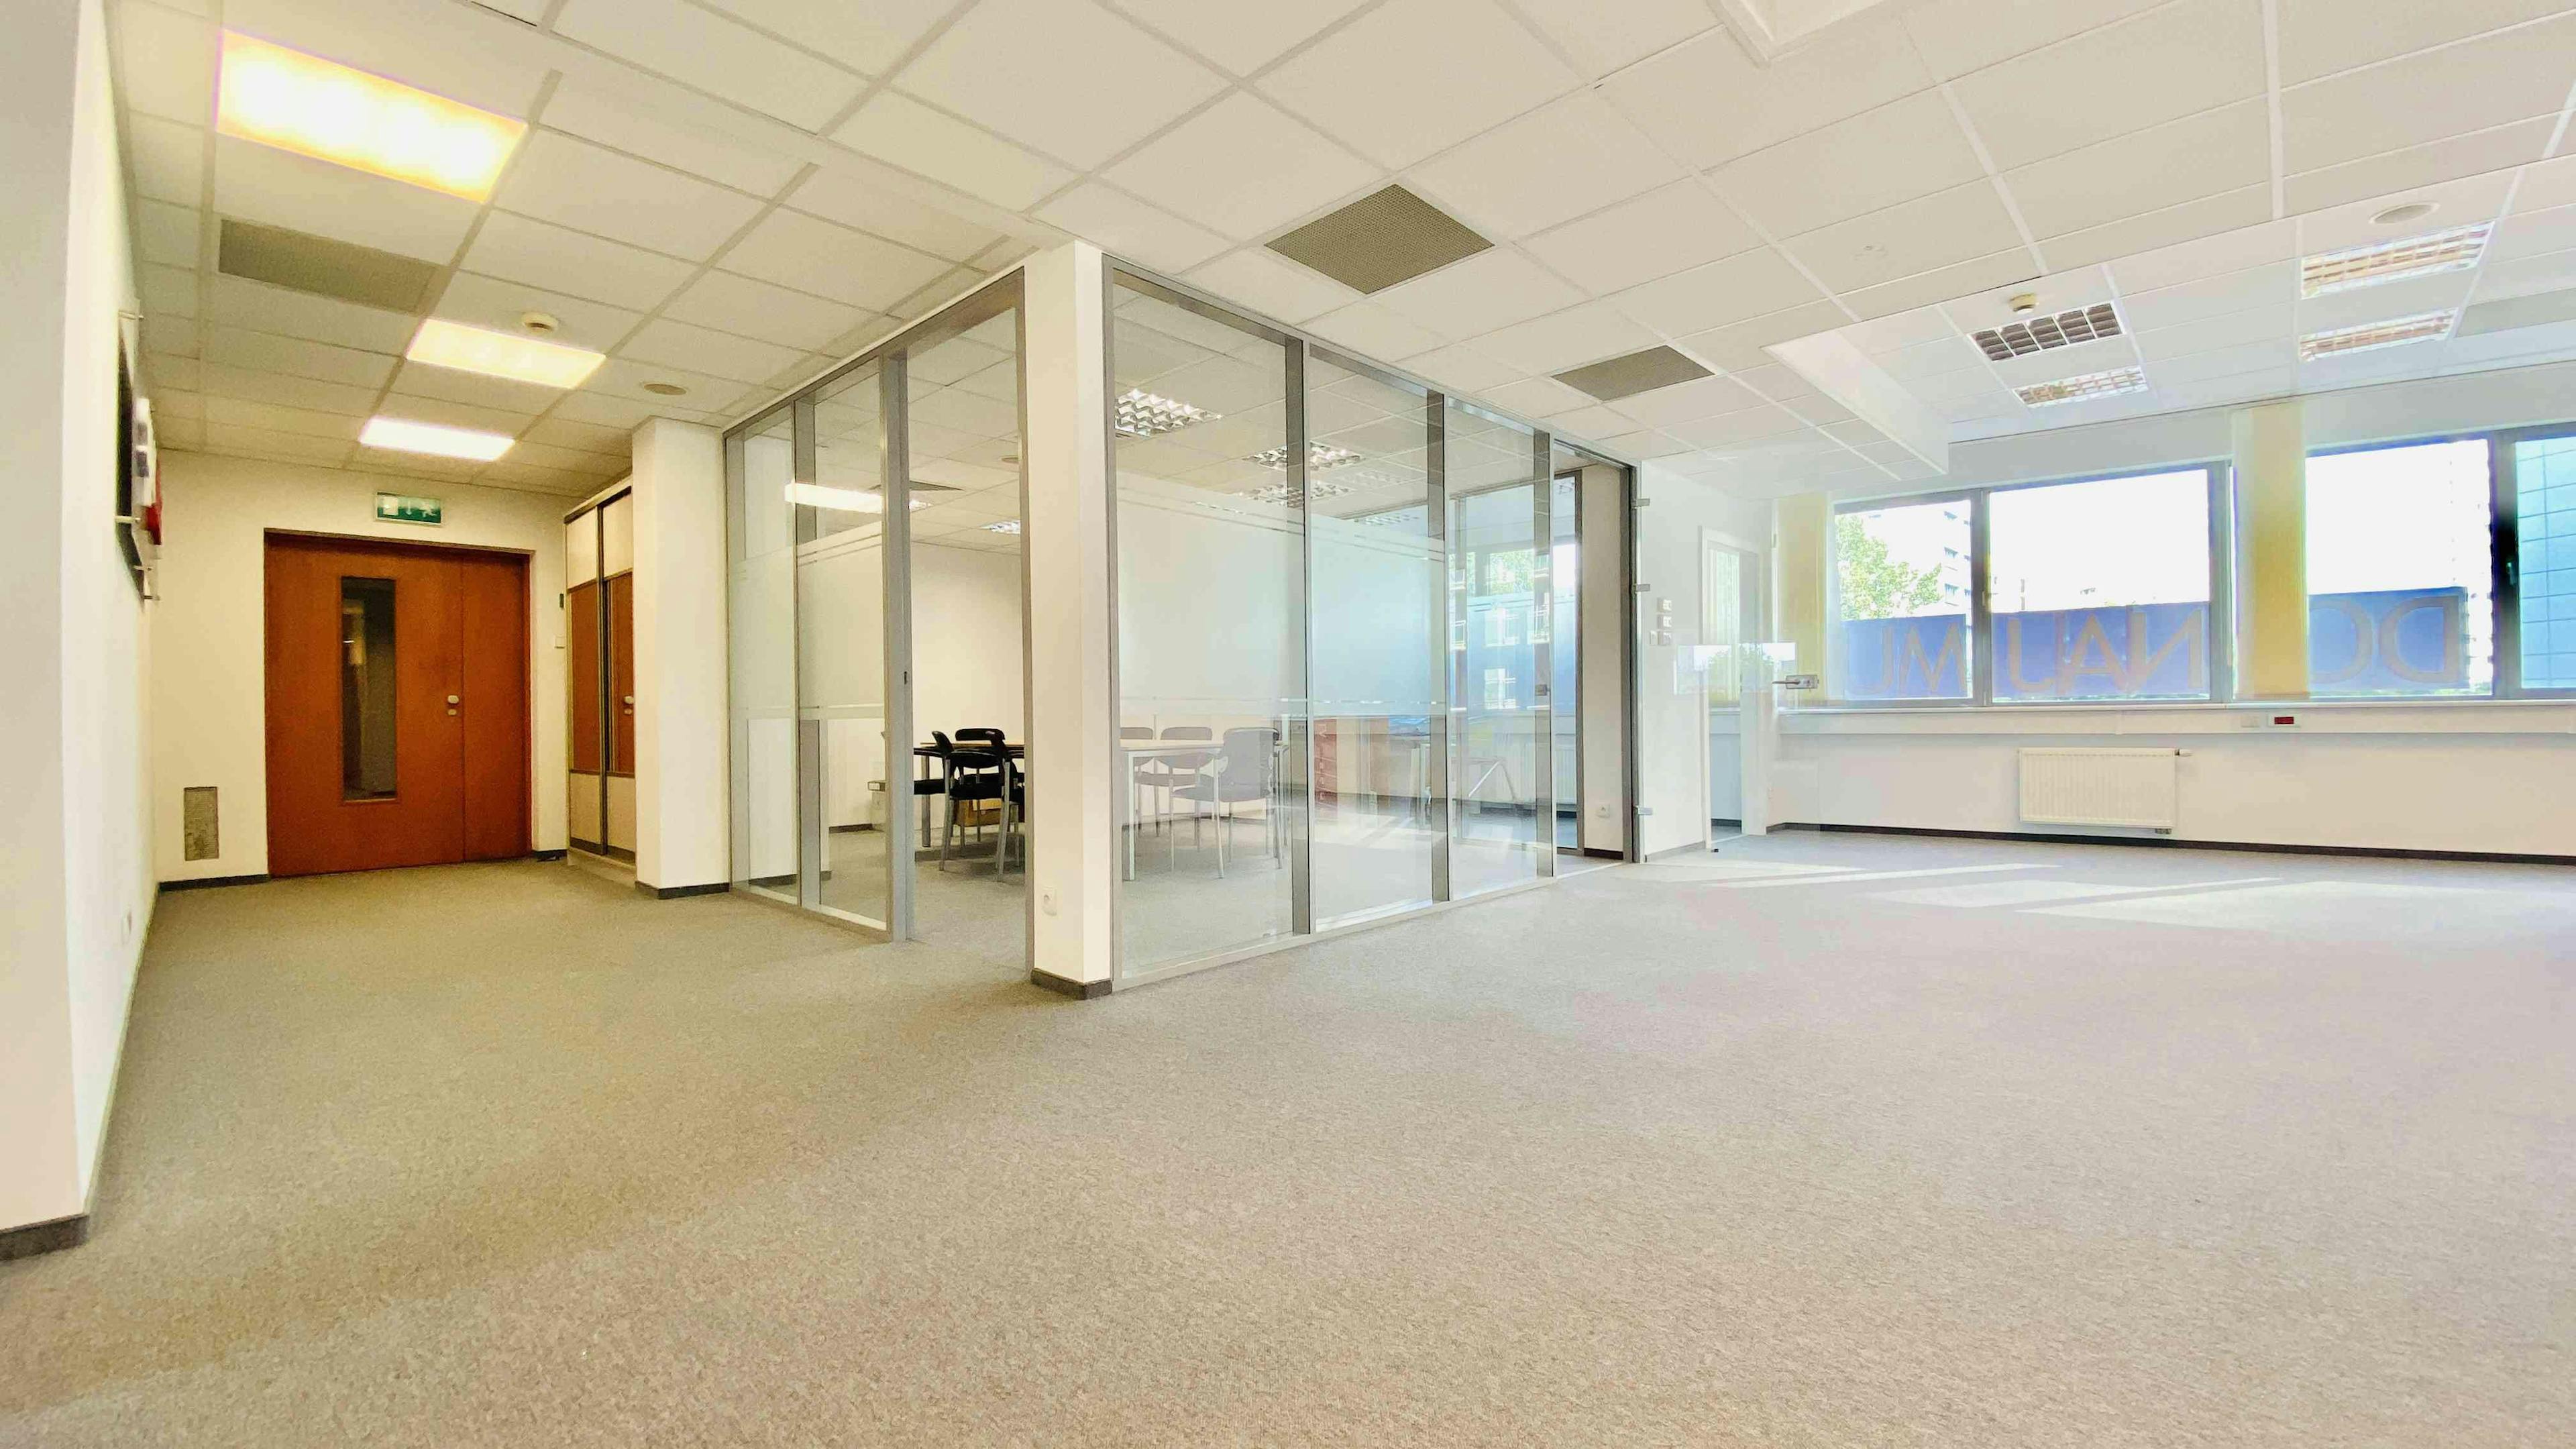 Offices for rent in Offices Kliwer #3